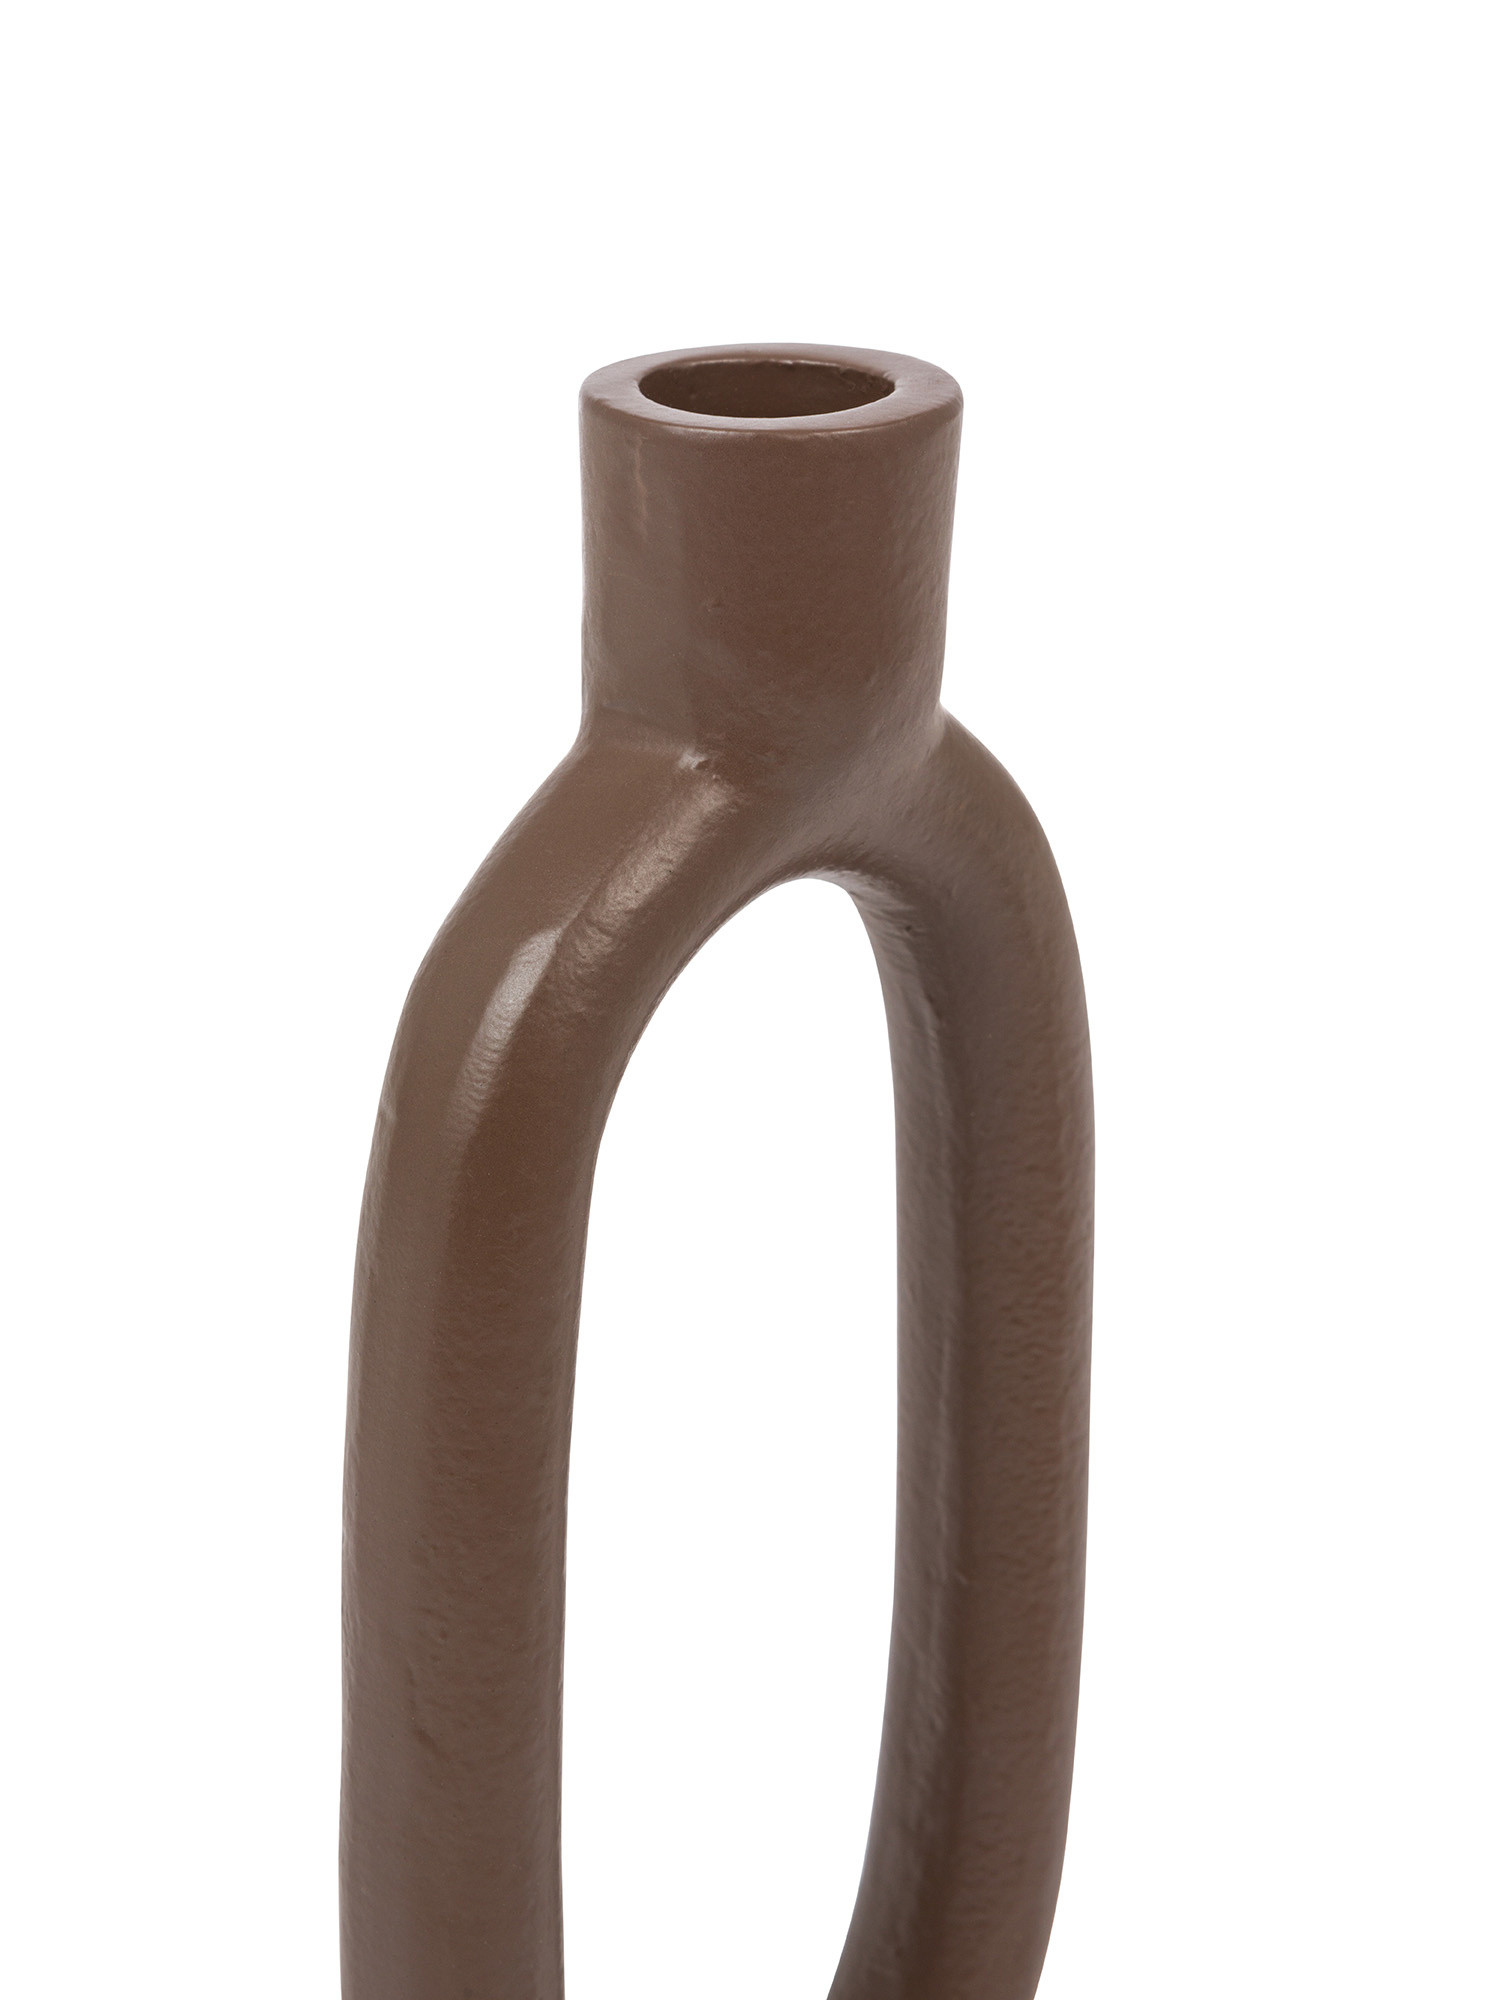 Aluminum candlestick, Brown, large image number 1